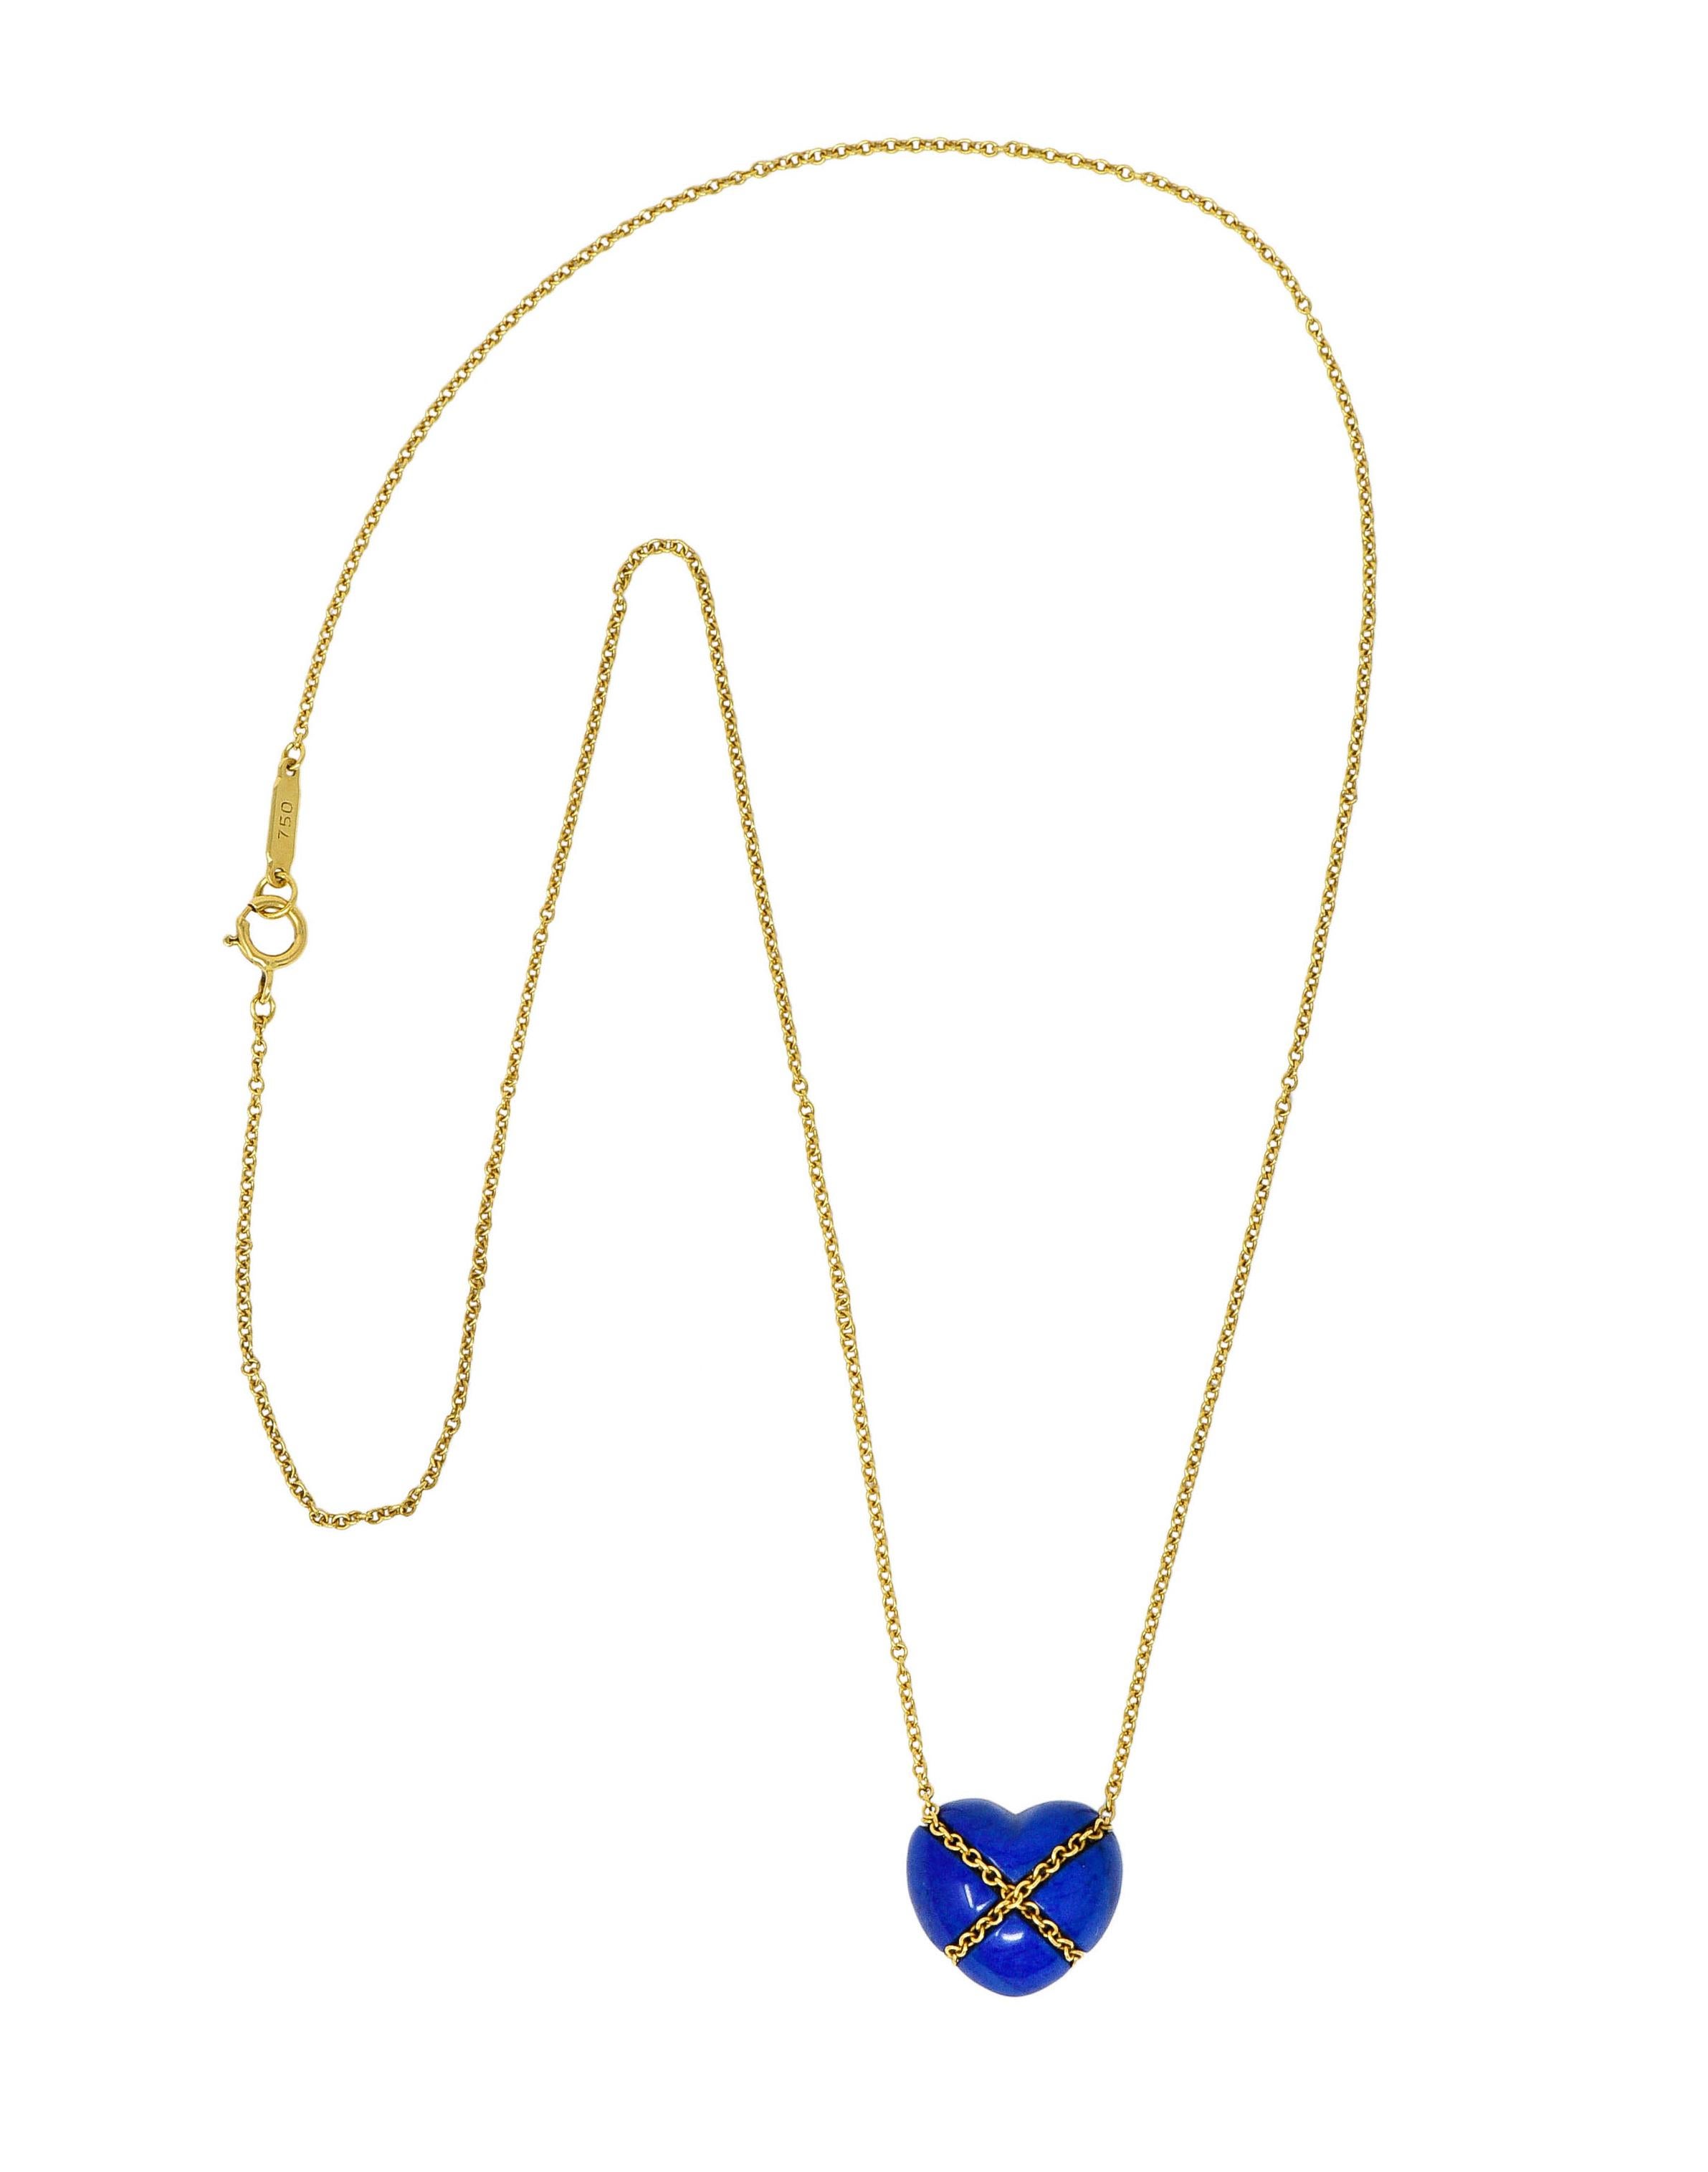 Classic cable chain necklace centers a lapis lazuli heart cabochon

Opaque and is uniformly ultramarine blue in color

Tightly wrapped with cable chain in an X motif

Necklace completes as a spring ring clasp

Logo link is stamped 750 for 18 karat